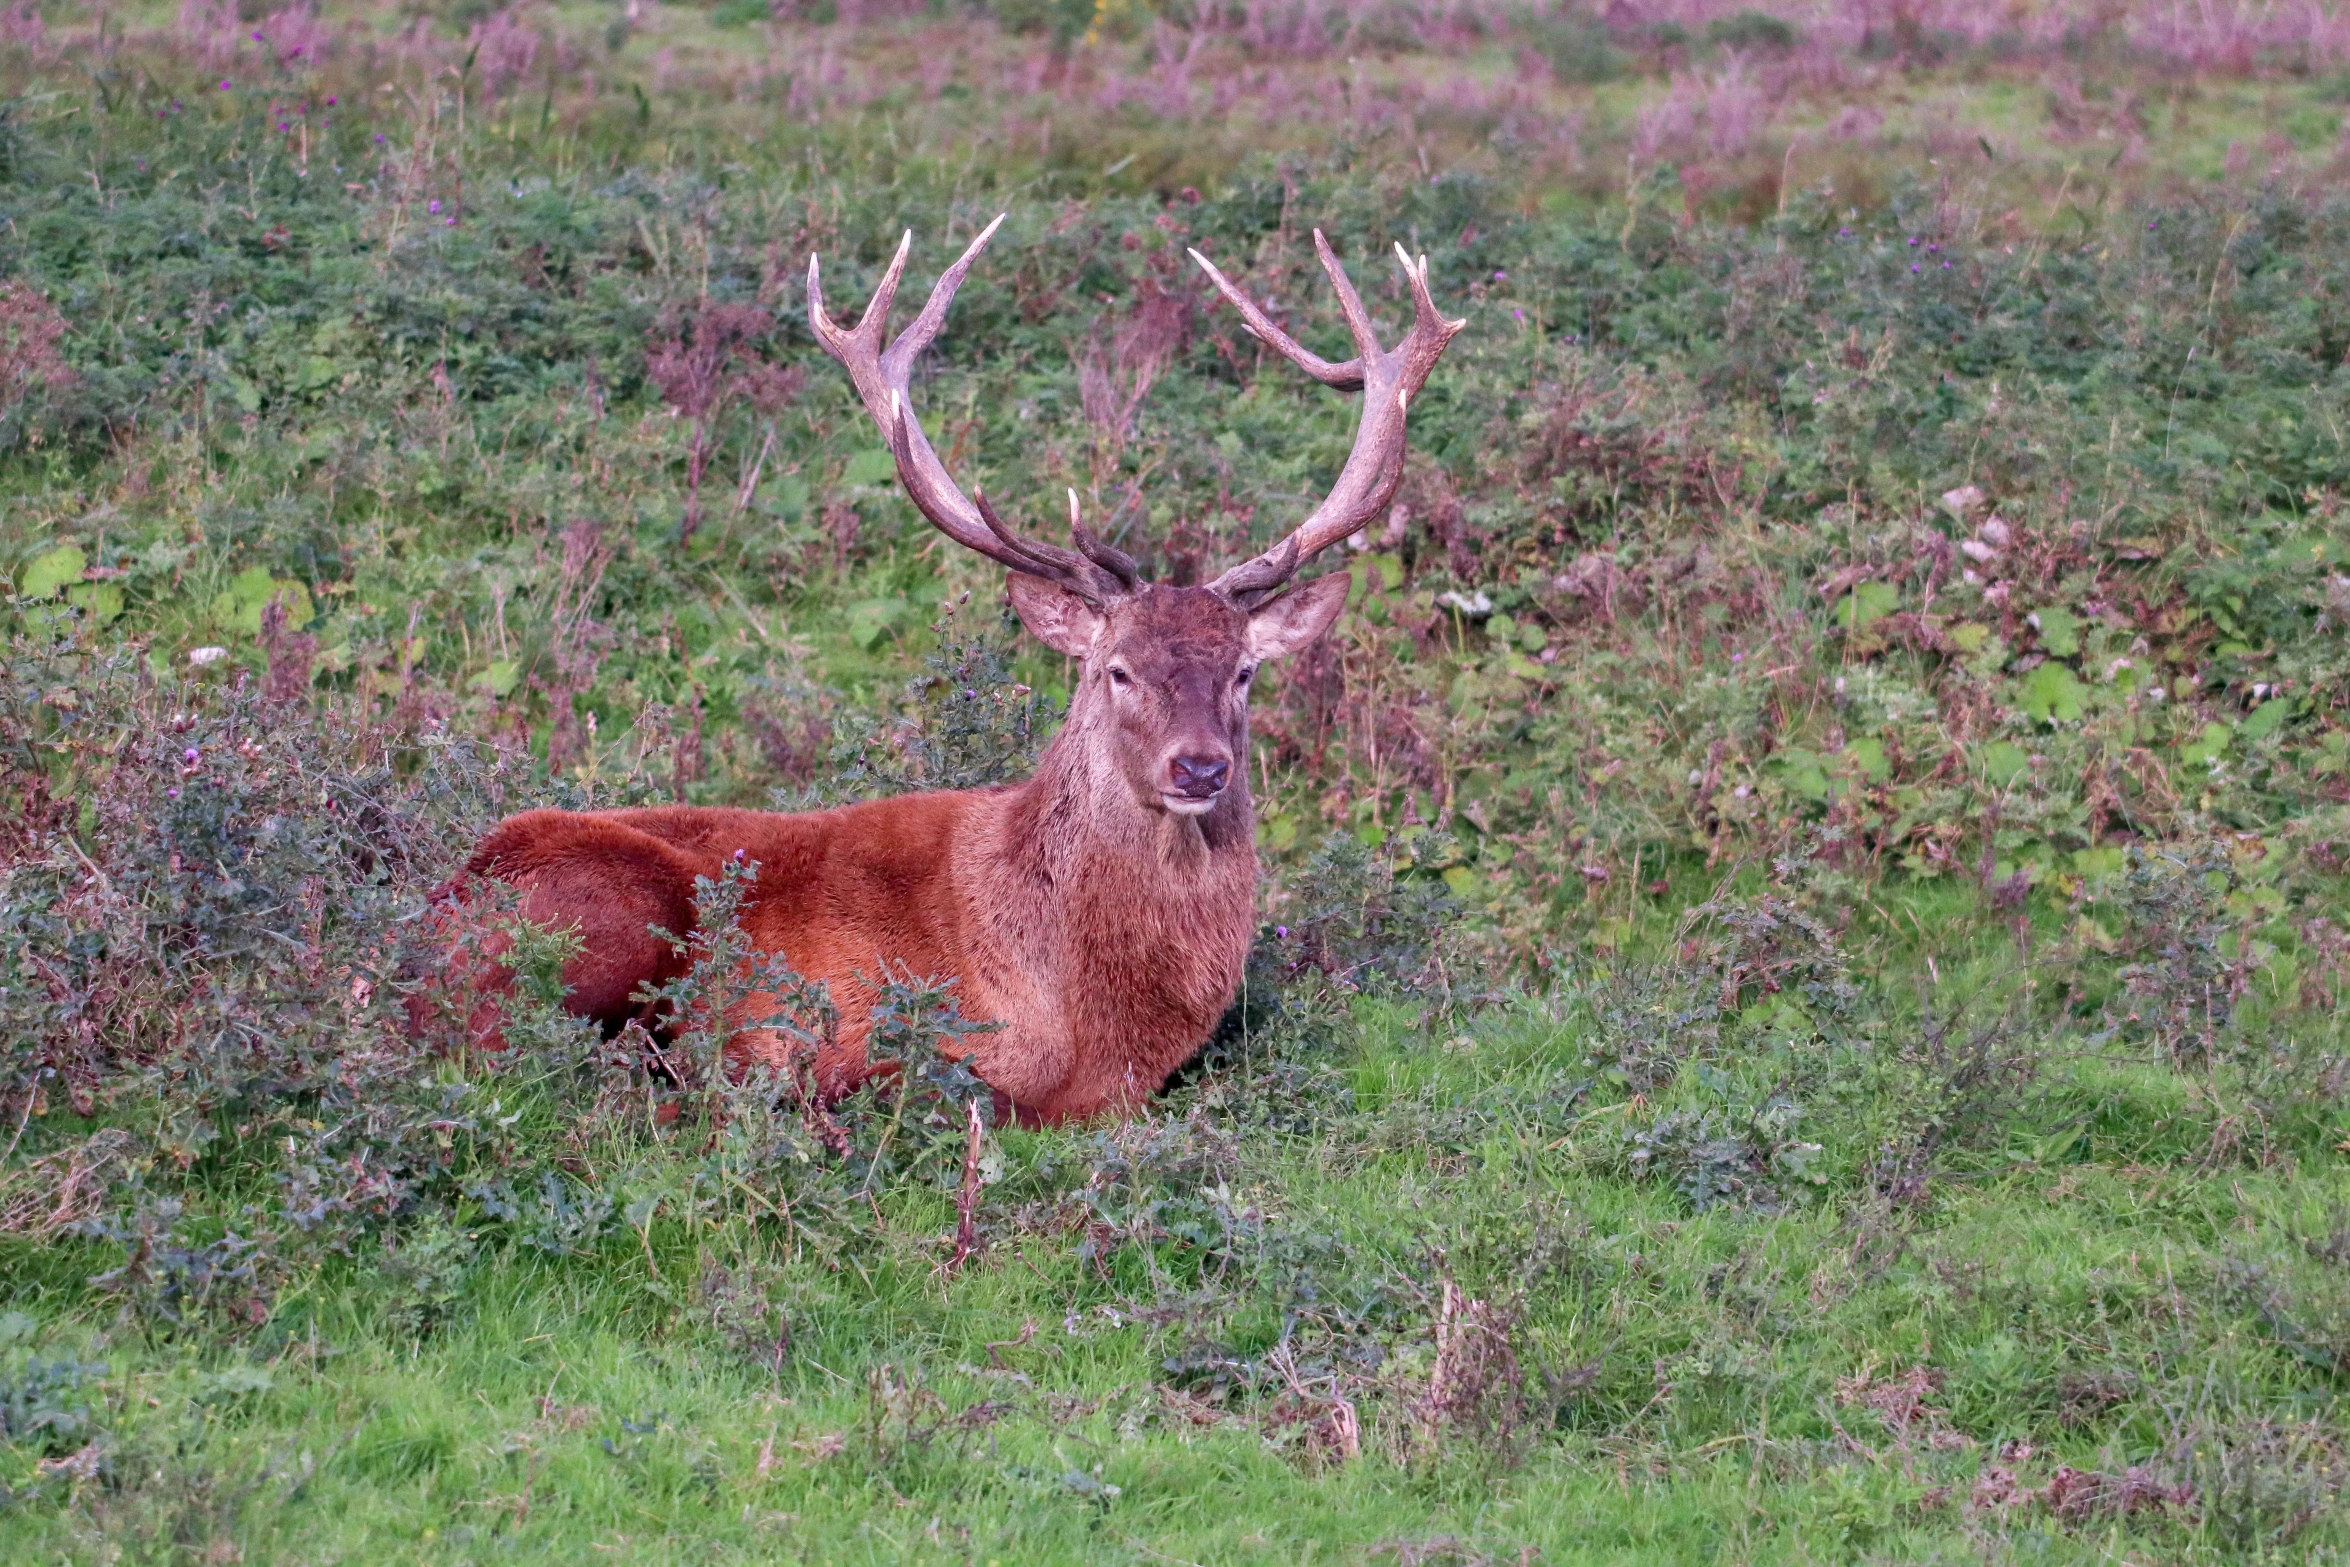 an orange deer with very large horns sitting in the grass